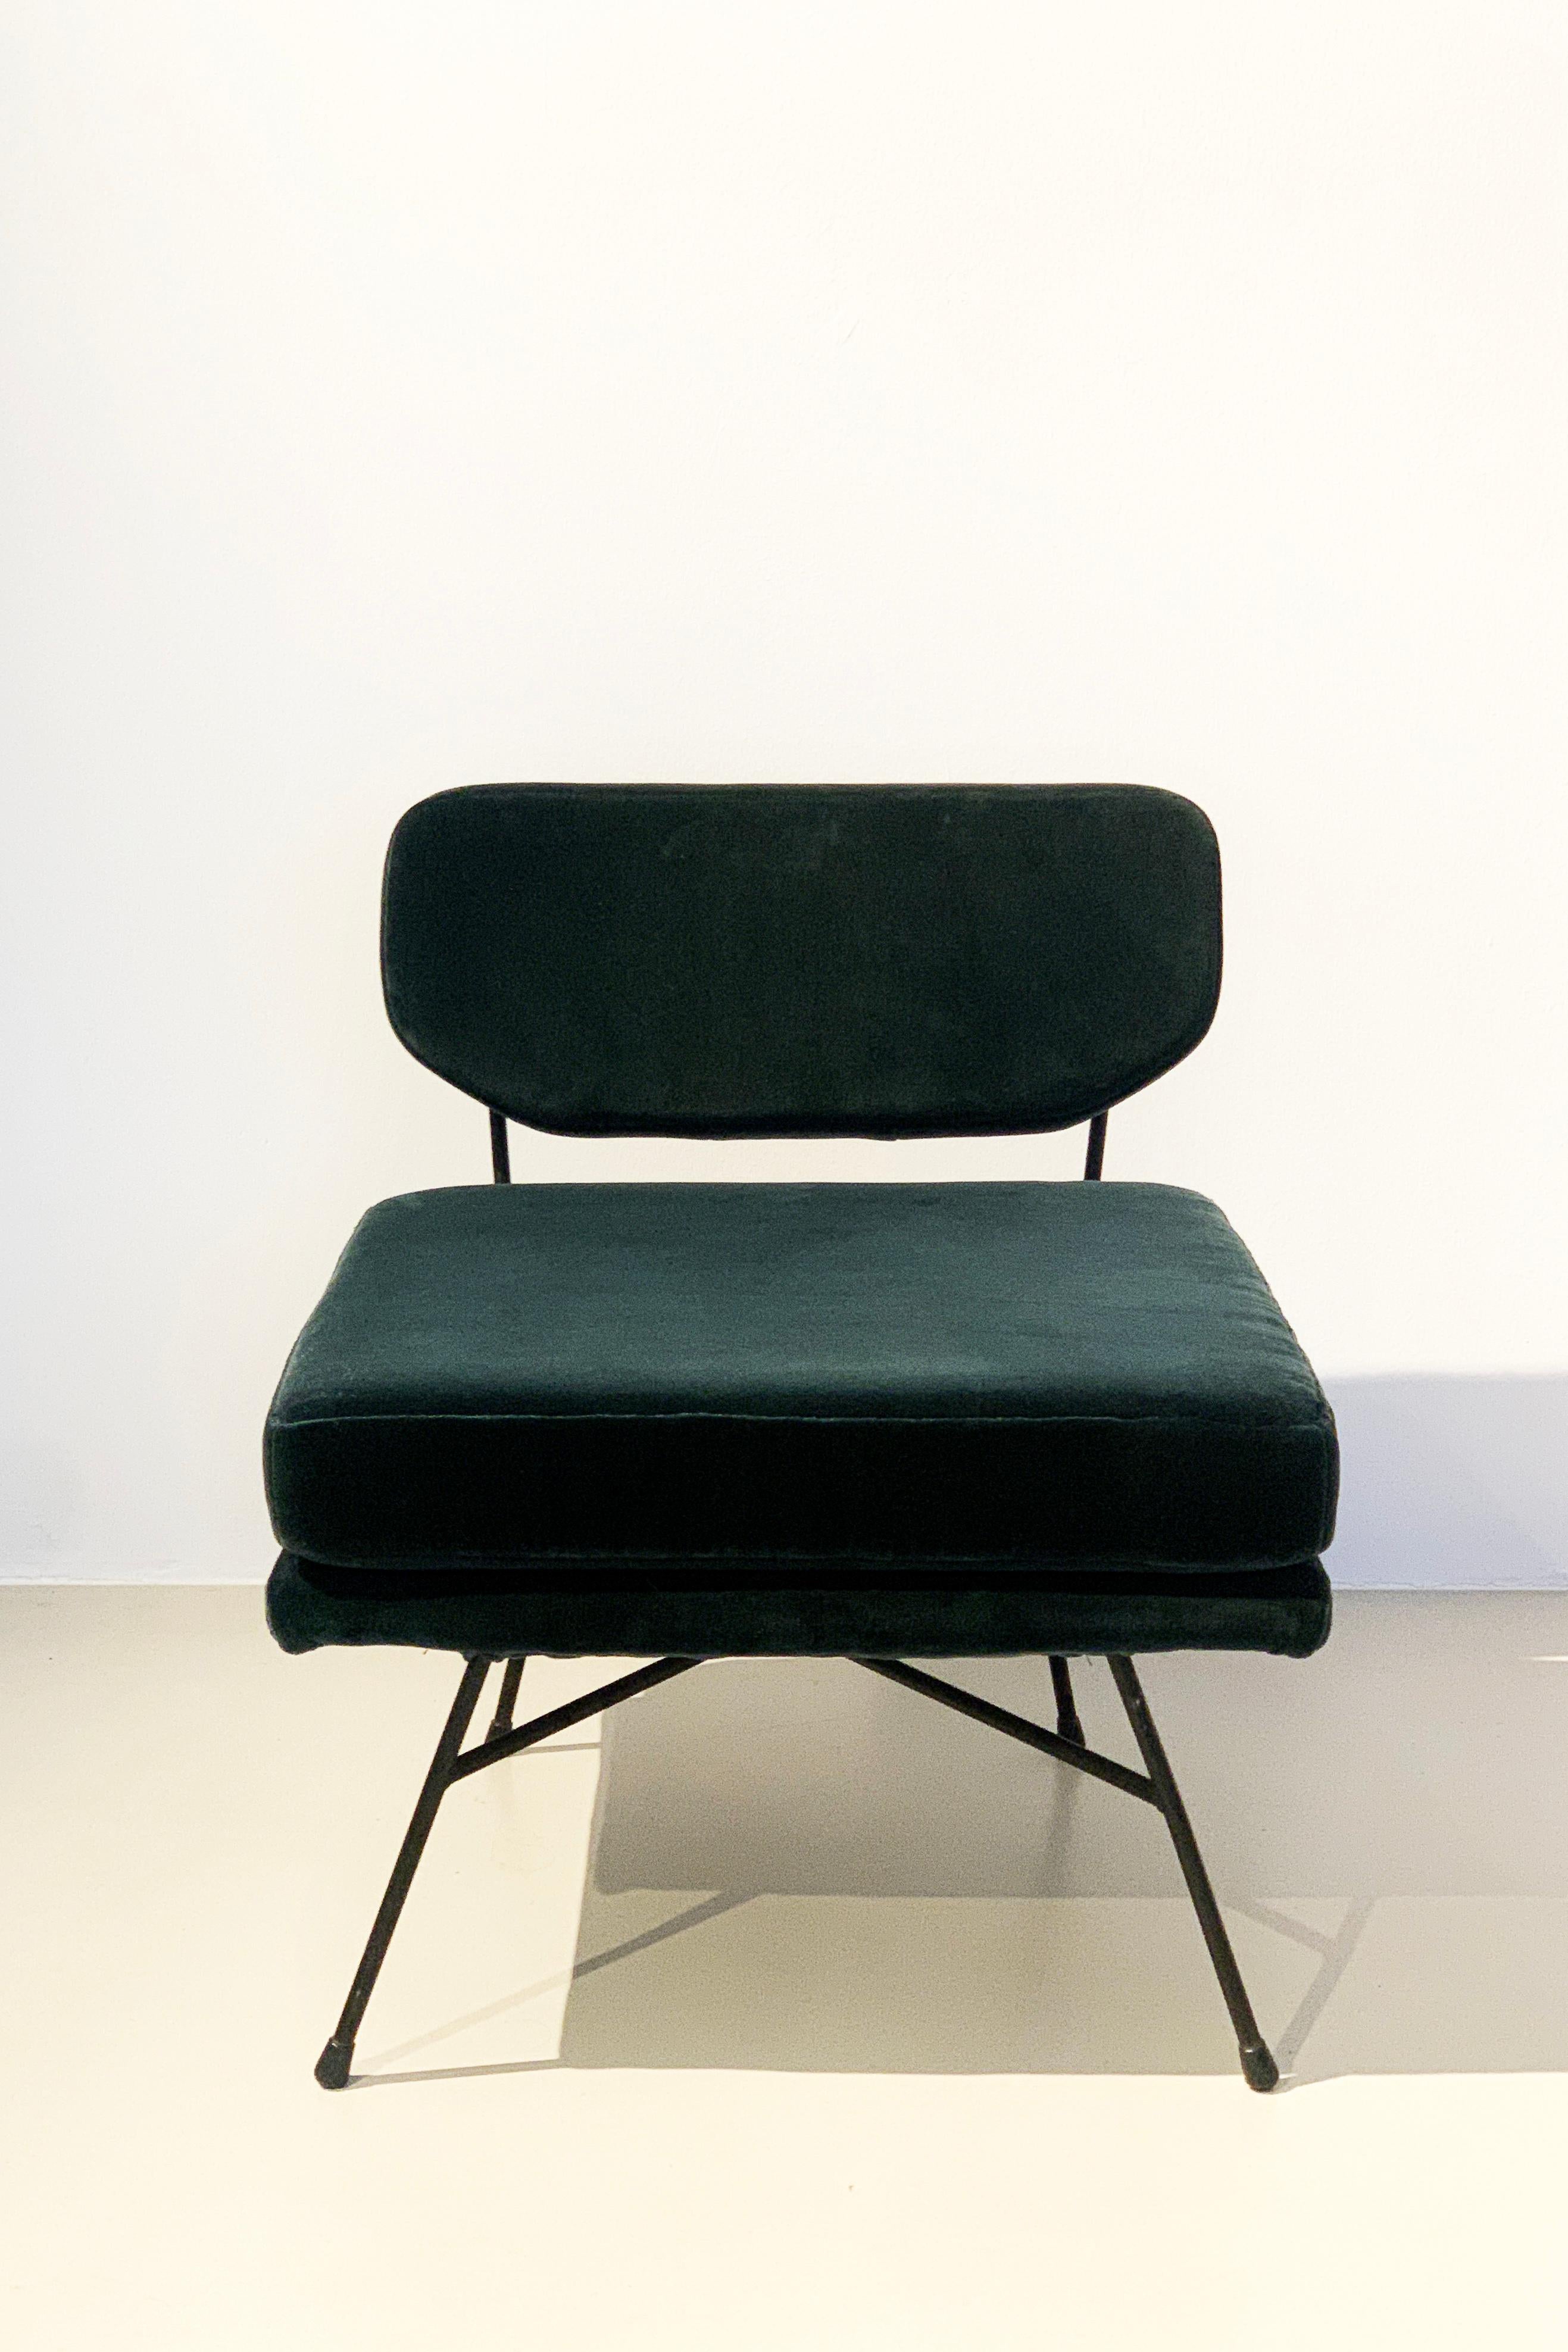 Steel Pair 'Elettra' Lounge Chairs by BBPR, Arflex, Italy 1953, Compasso D'Oro 1954 For Sale